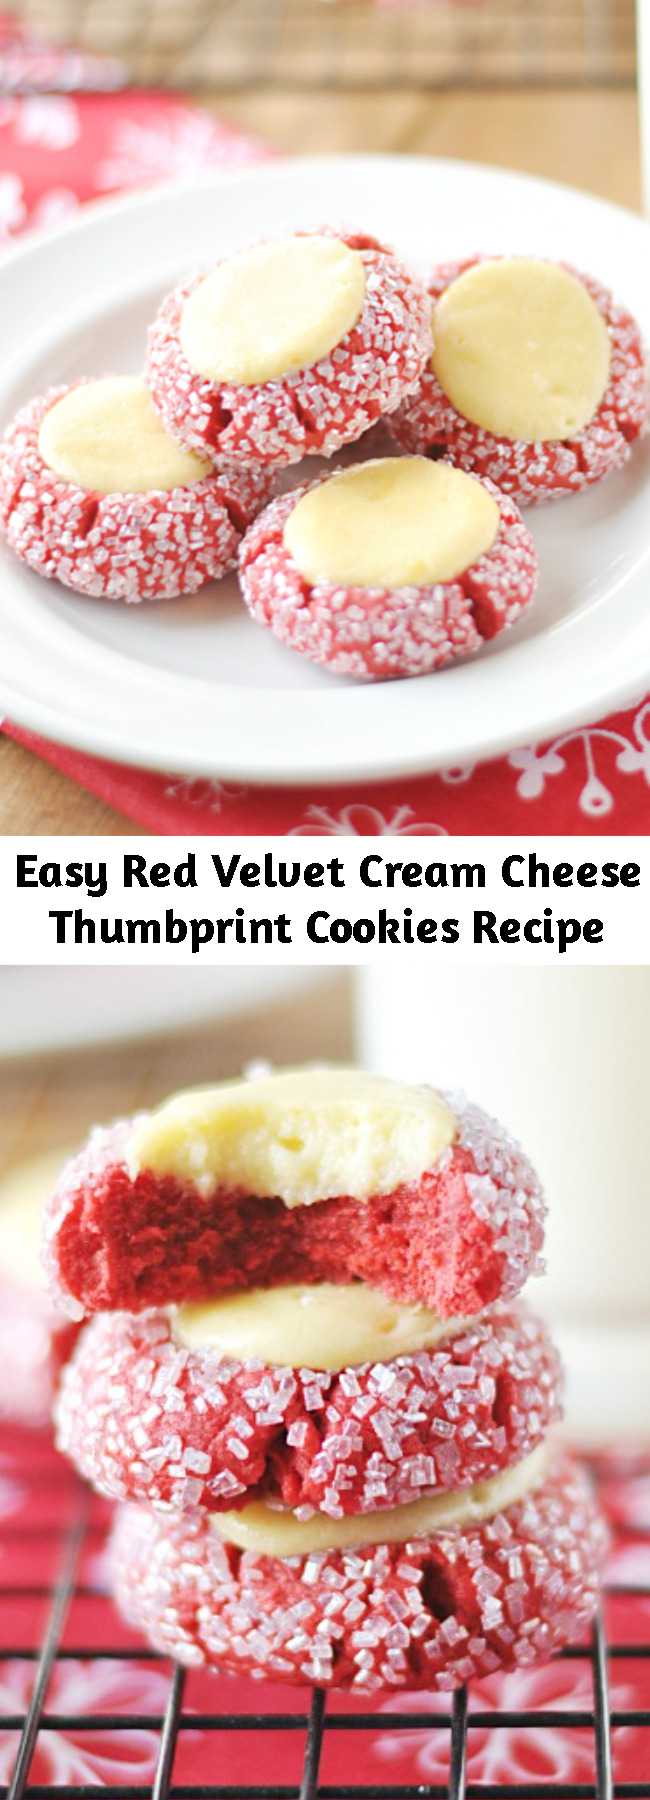 Easy Red Velvet Cream Cheese Thumbprint Cookies Recipe - These Red Velvet Thumbprints are a cookie and cheesecake in one! Perfect for Christmas cookie plates and dangerously delicious.